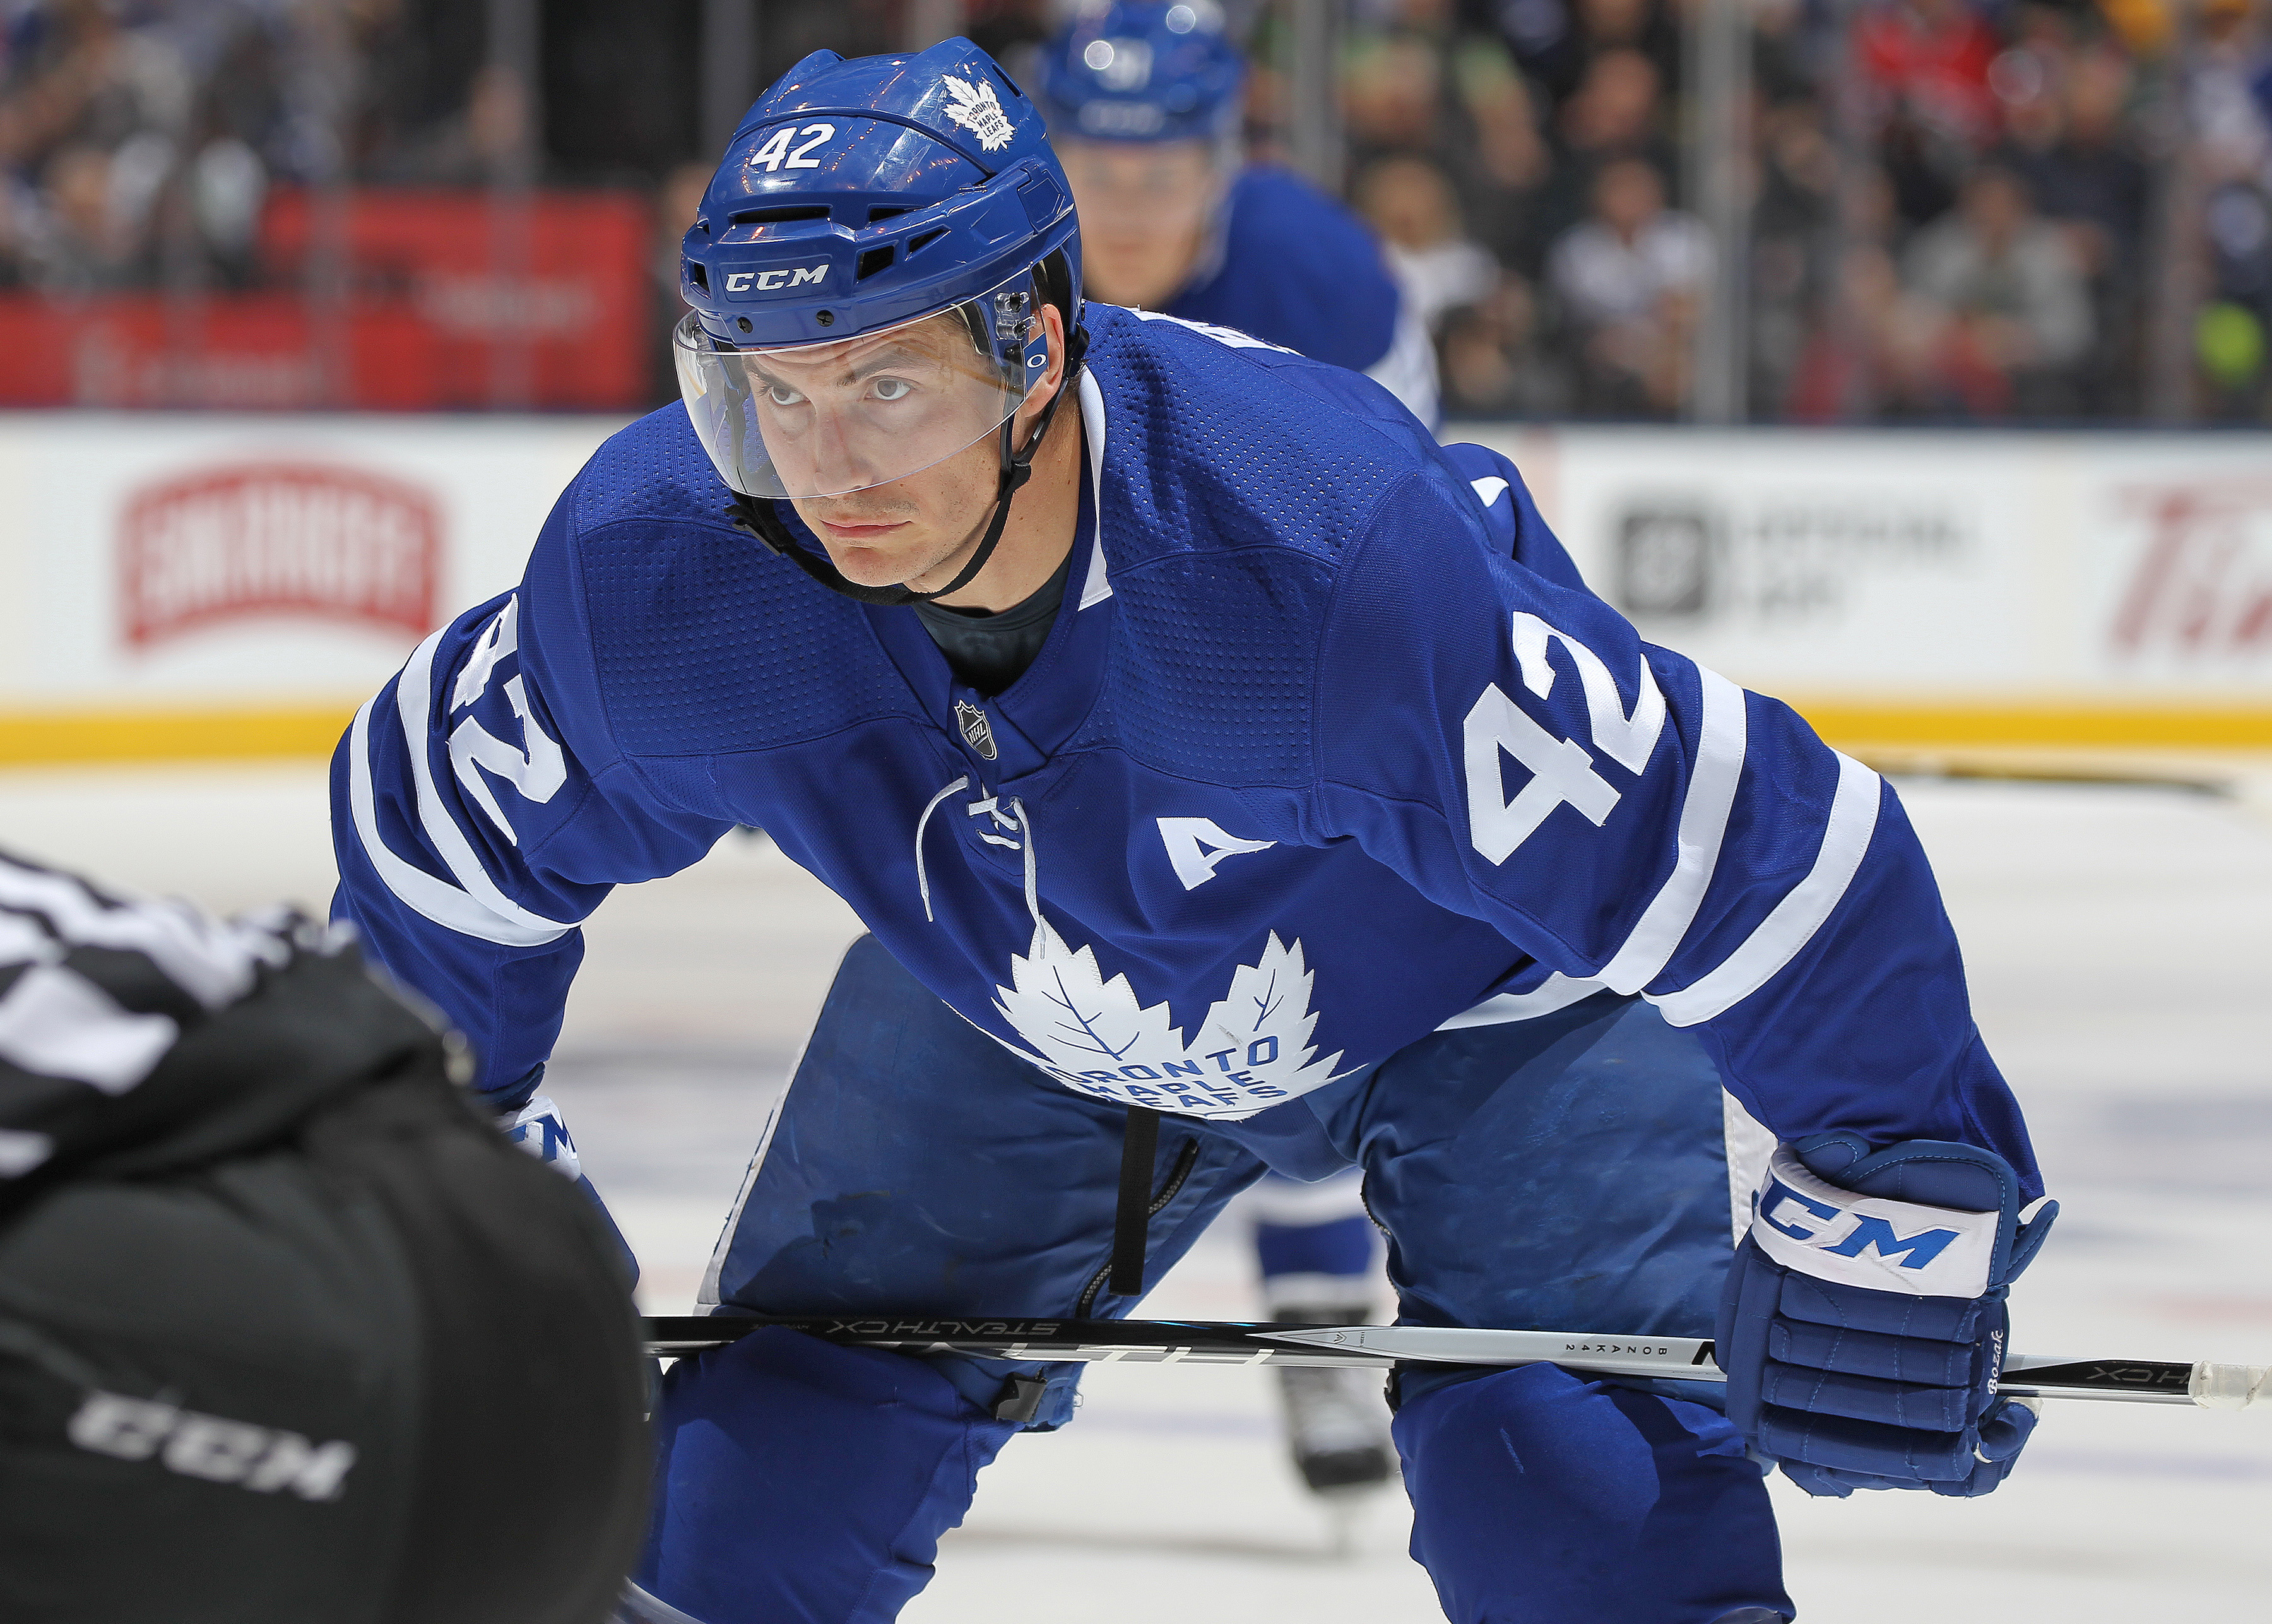 10 Veteran UFA's Toronto Maple Leafs Could Sign This Offseason